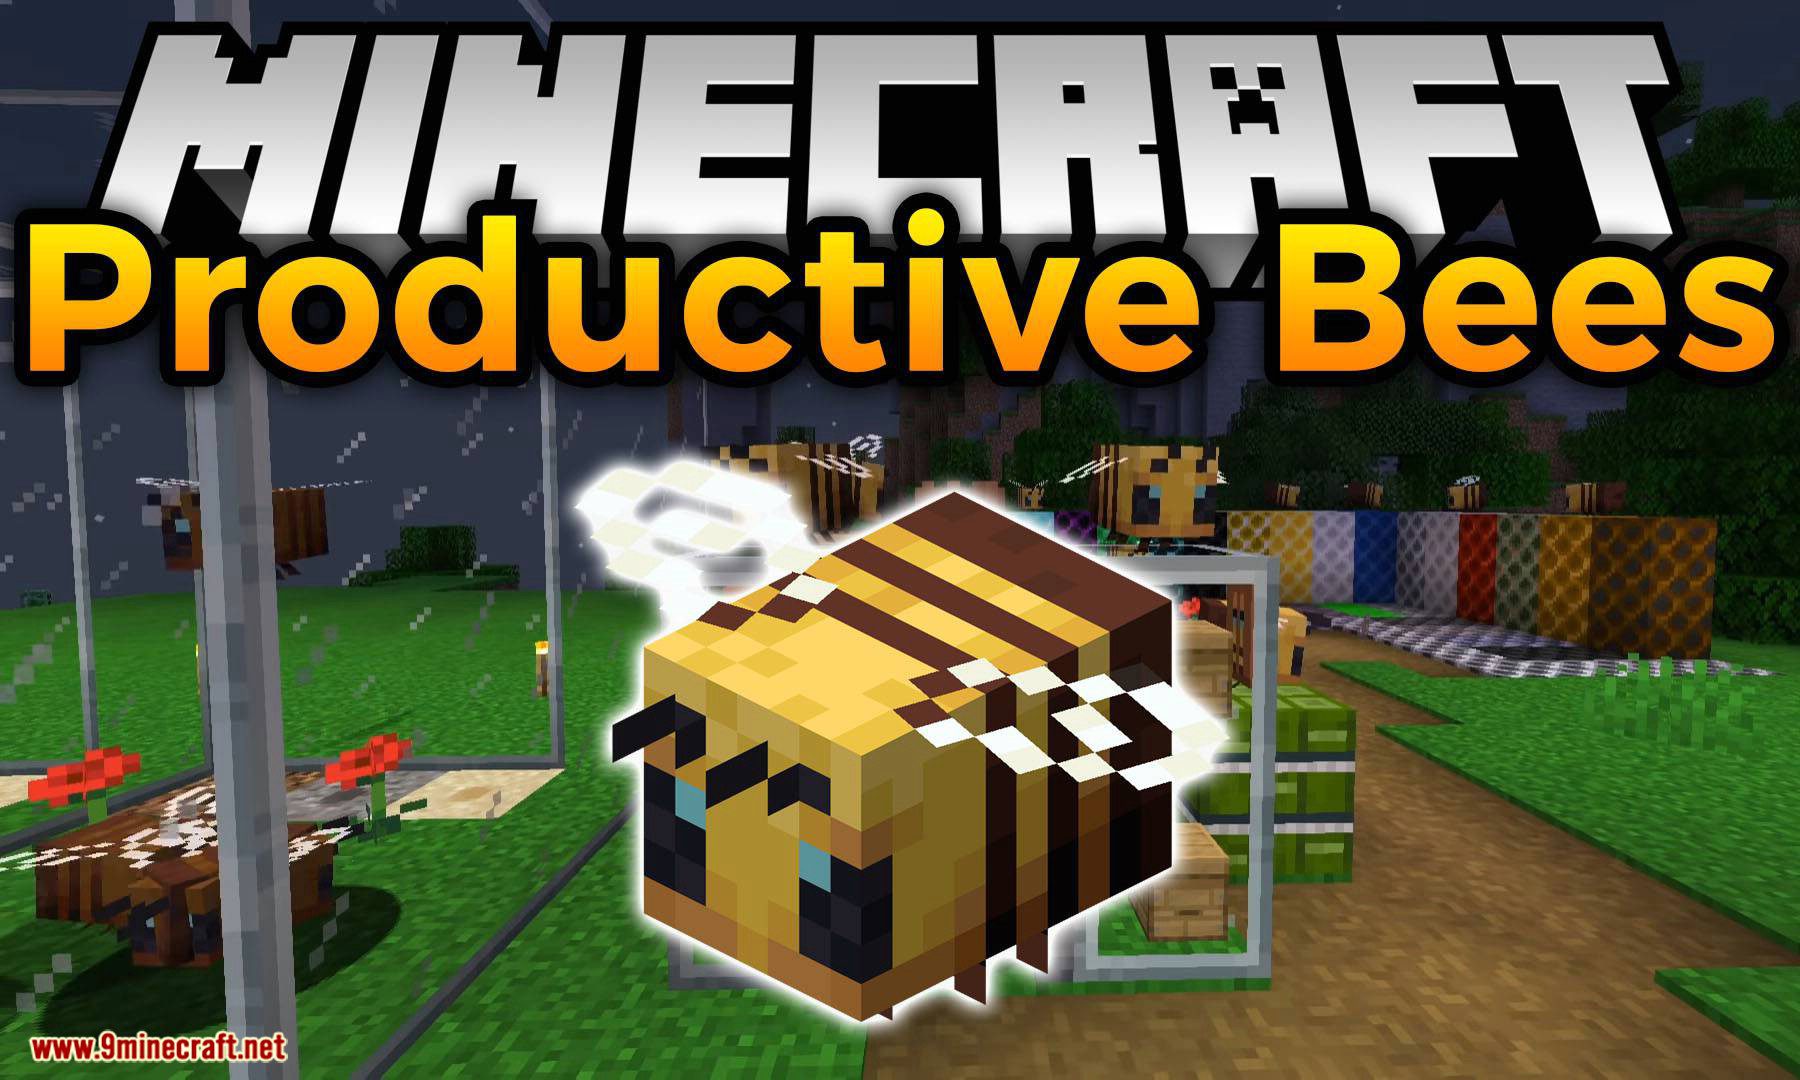 Productive Bees mod for minecraft logo